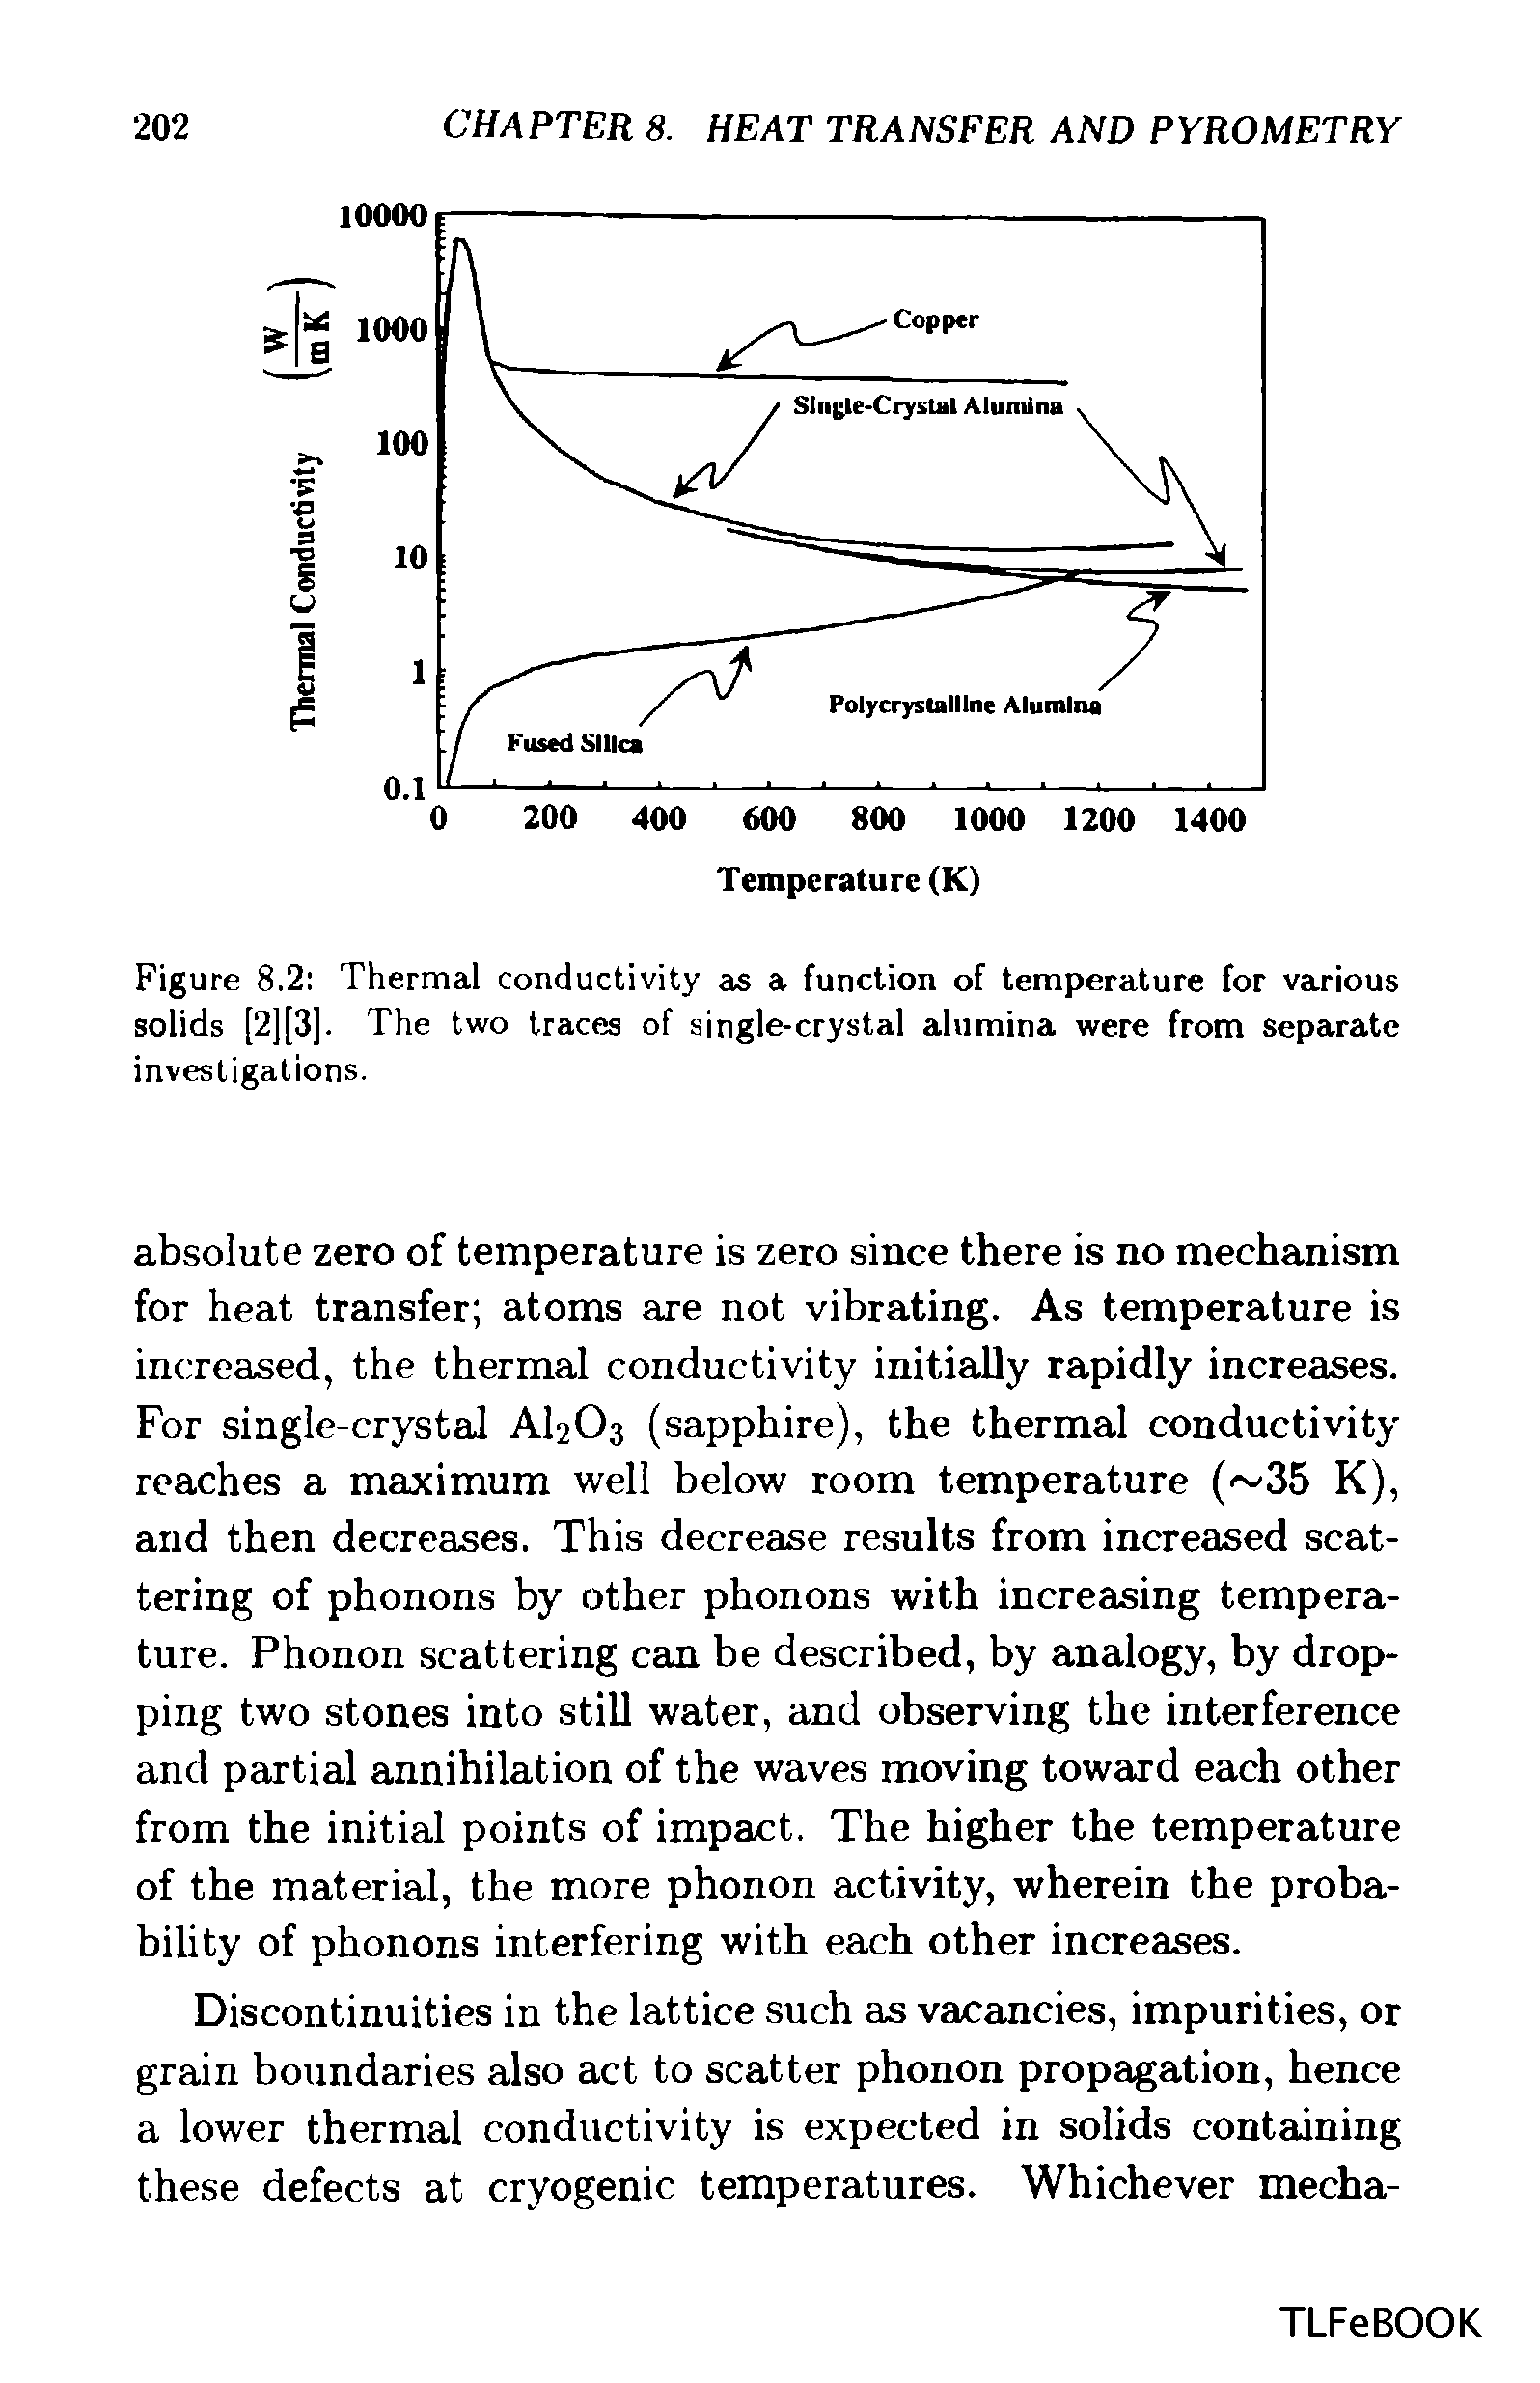 Figure 8.2 Thermal conductivity as a function of temperature for various solids [2][3]. The two traces of single-crystal alumina were from separate investigations.